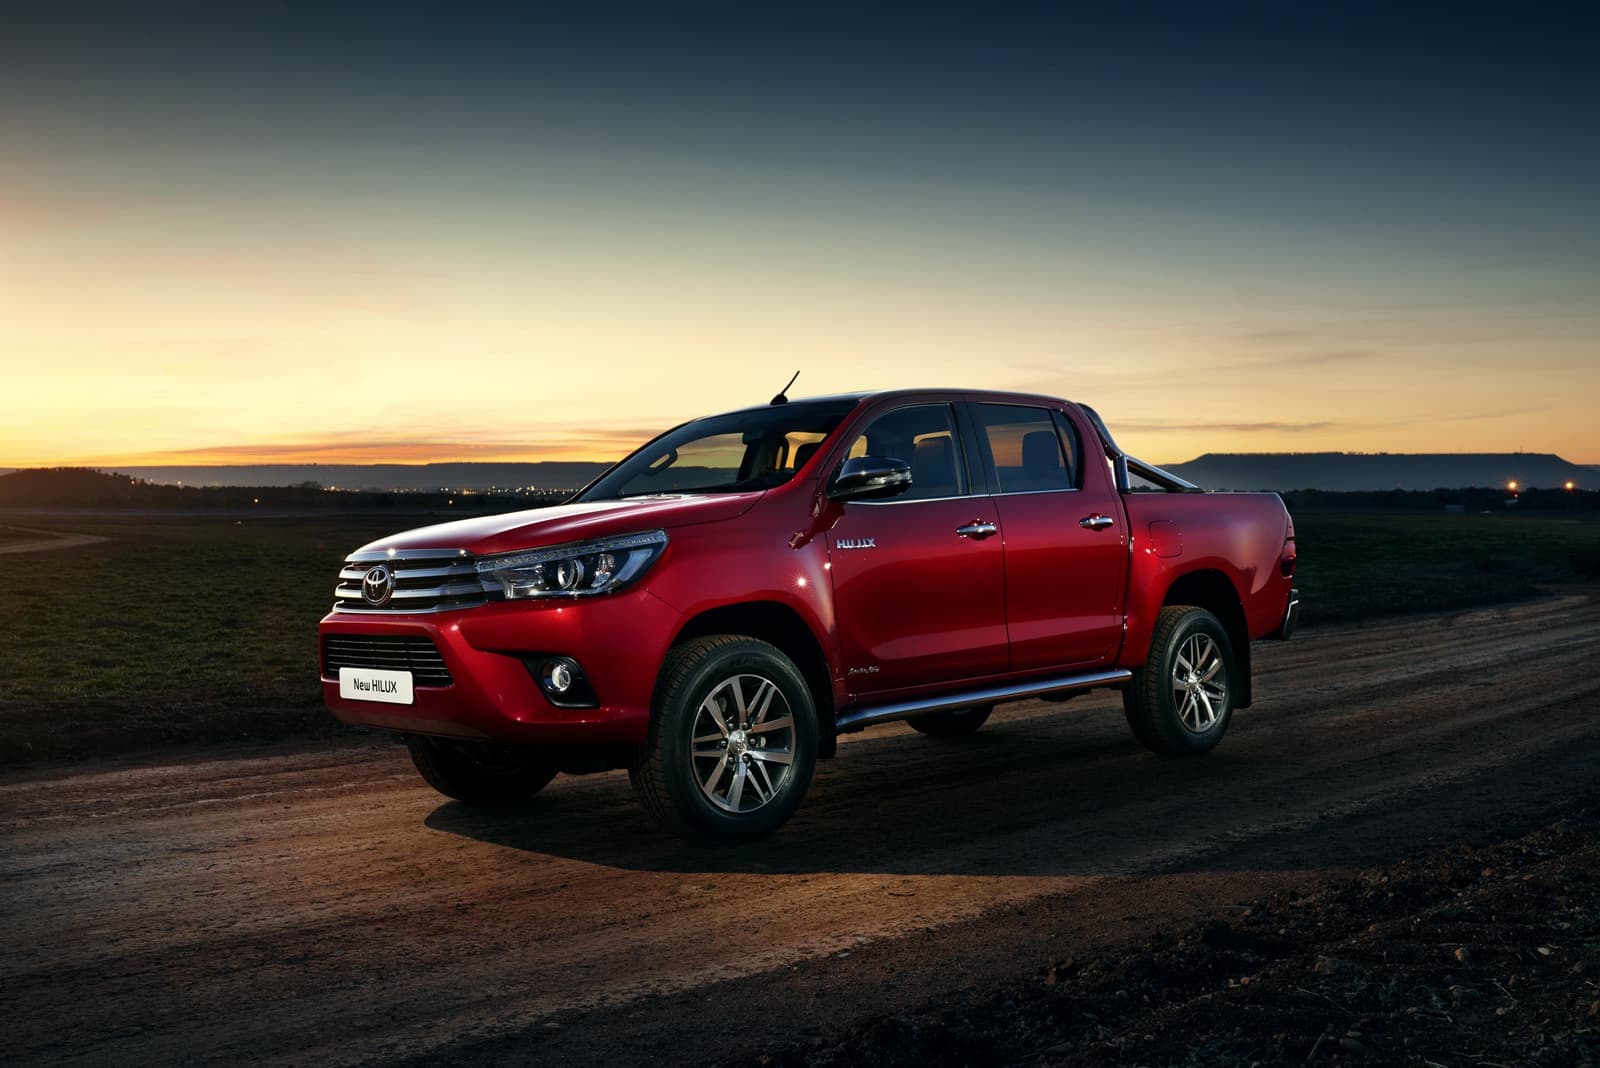 Toyota Hilux wallpapers 2K High Quality Download